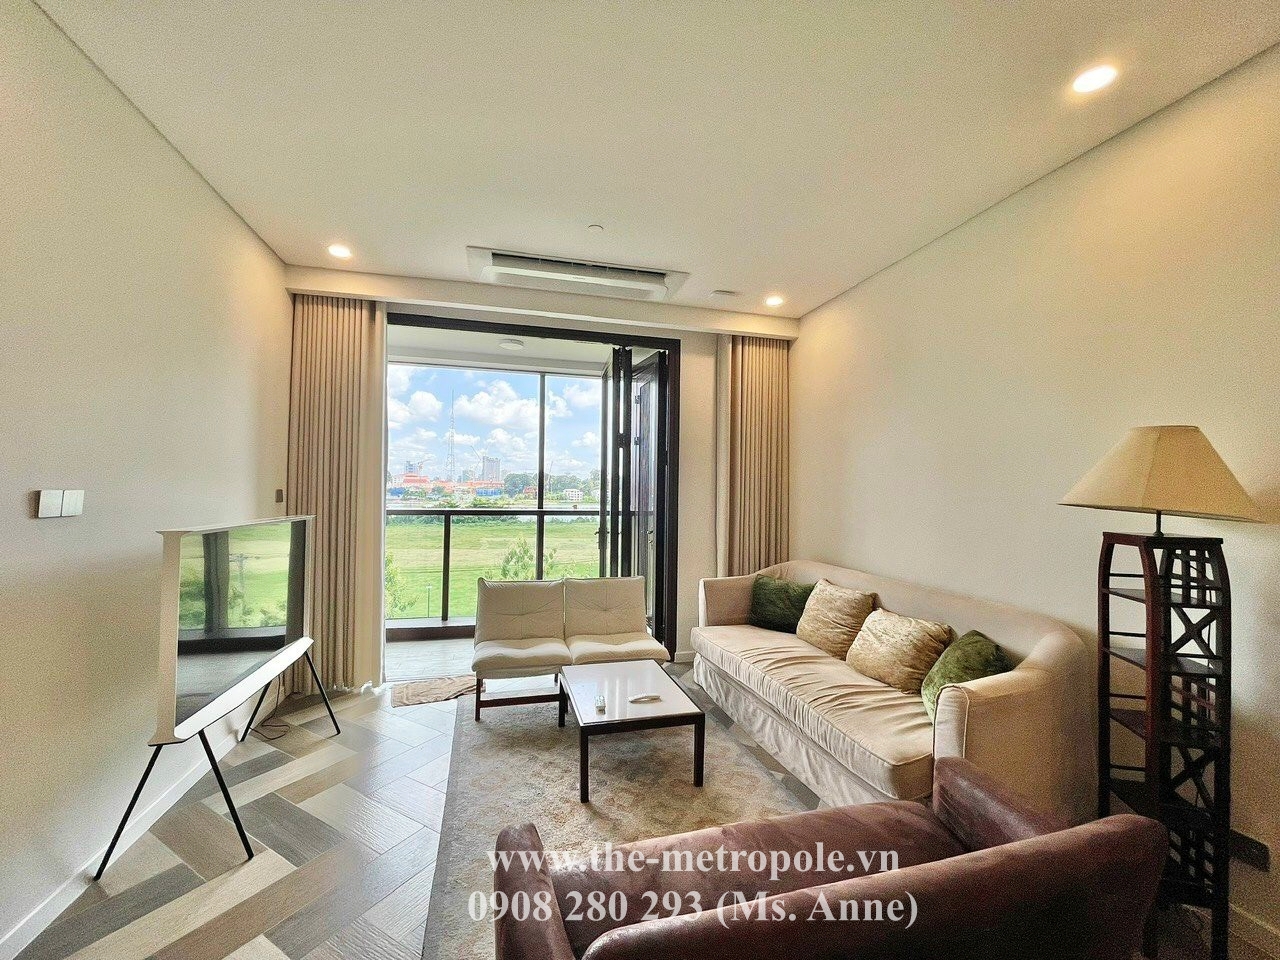 Low rental 1 bedroom apartment in The Metropole Thu Thiem for rent